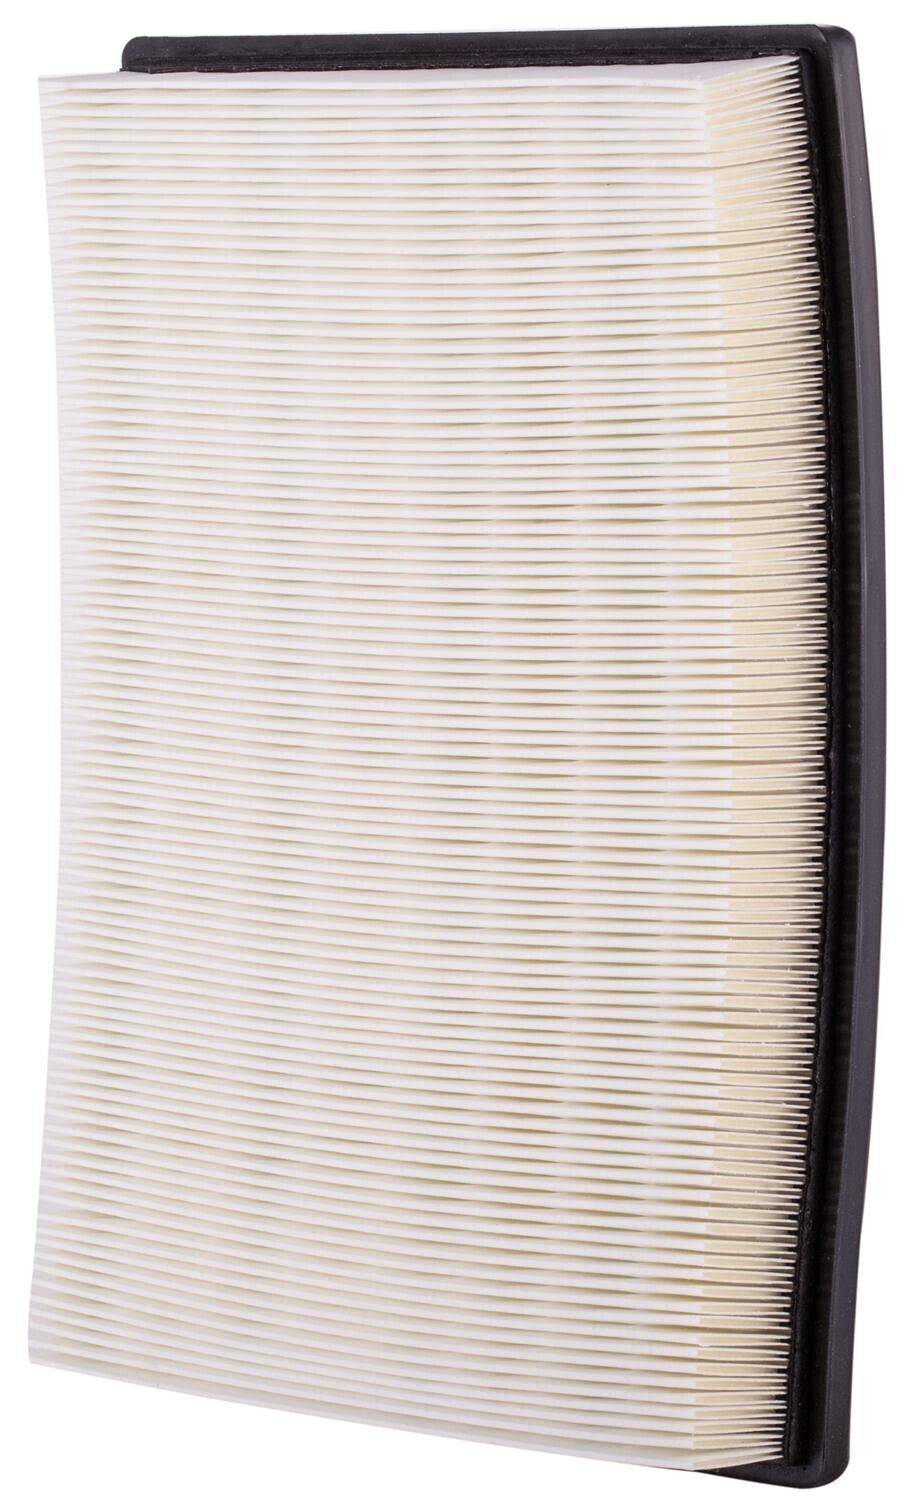 Air Filter for Continental, Brooklands, Turbo R, Silver Spur, S90+More PA4475